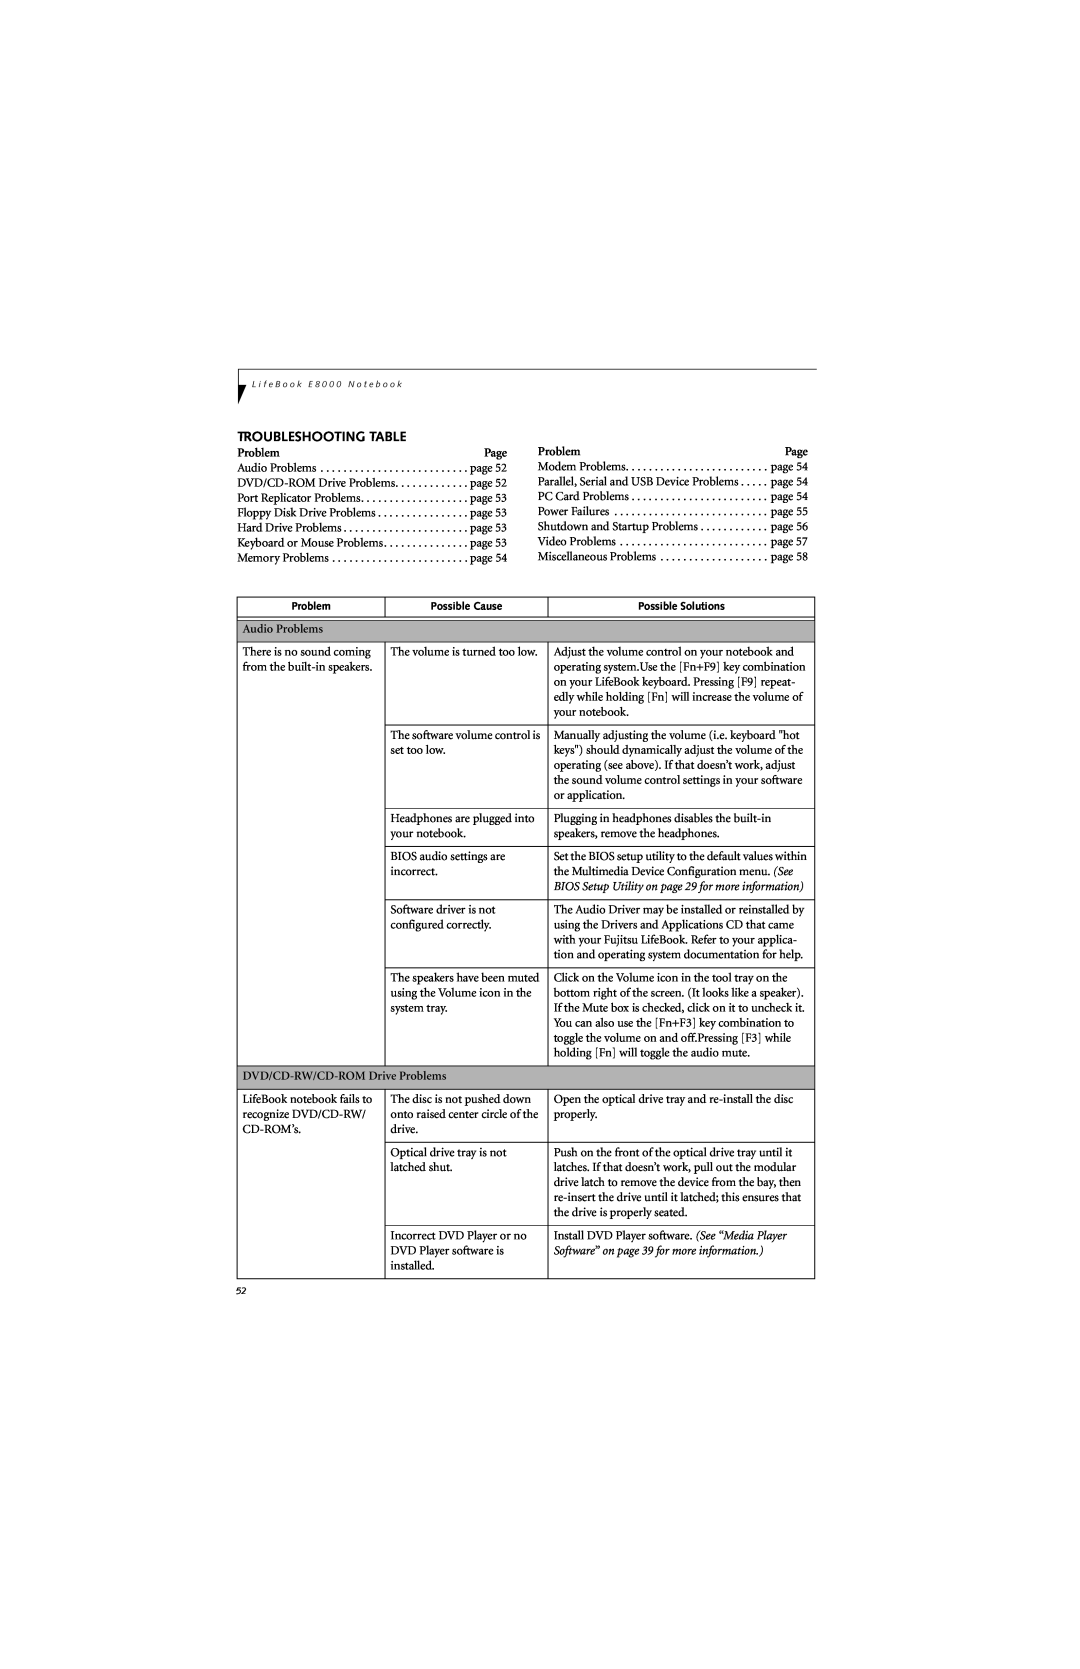 Fujitsu E8310 manual Troubleshooting Table, Audio Problems, BIOS Setup Utility on page 29 for more information 